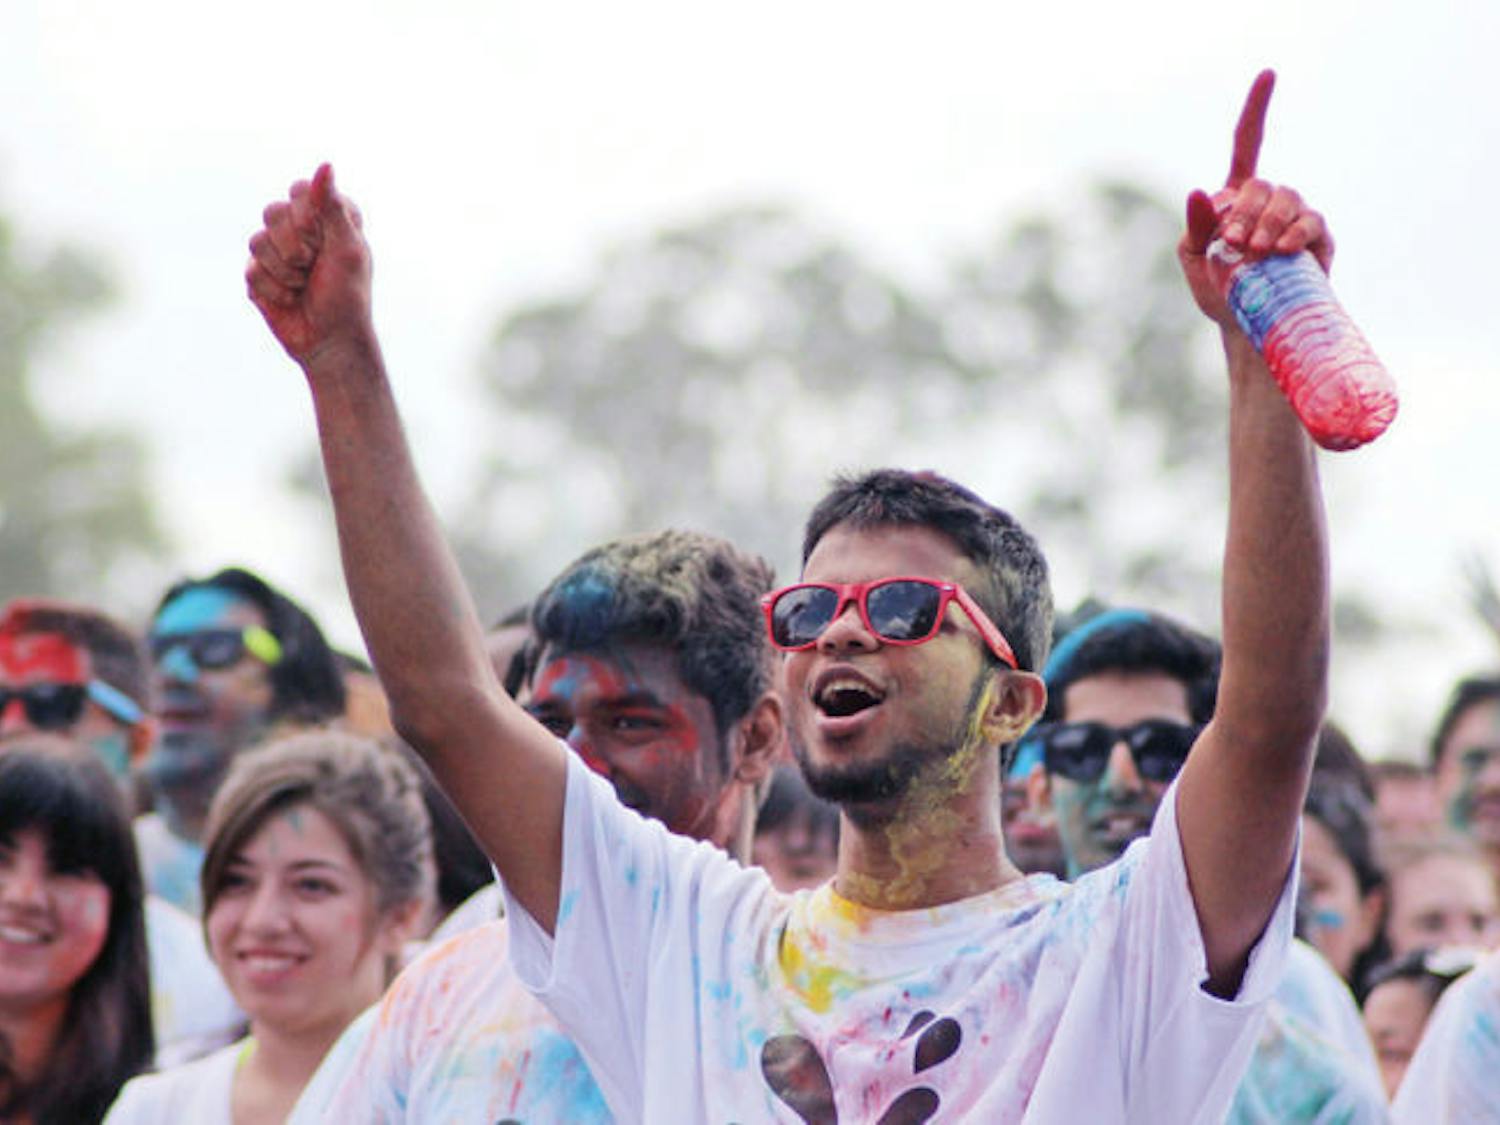 Sarim Zaidi, a 24-year-old UF computer science graduate student, cheers at the festival on Flavet Field. Holi is observed to celebrate spring.&nbsp;